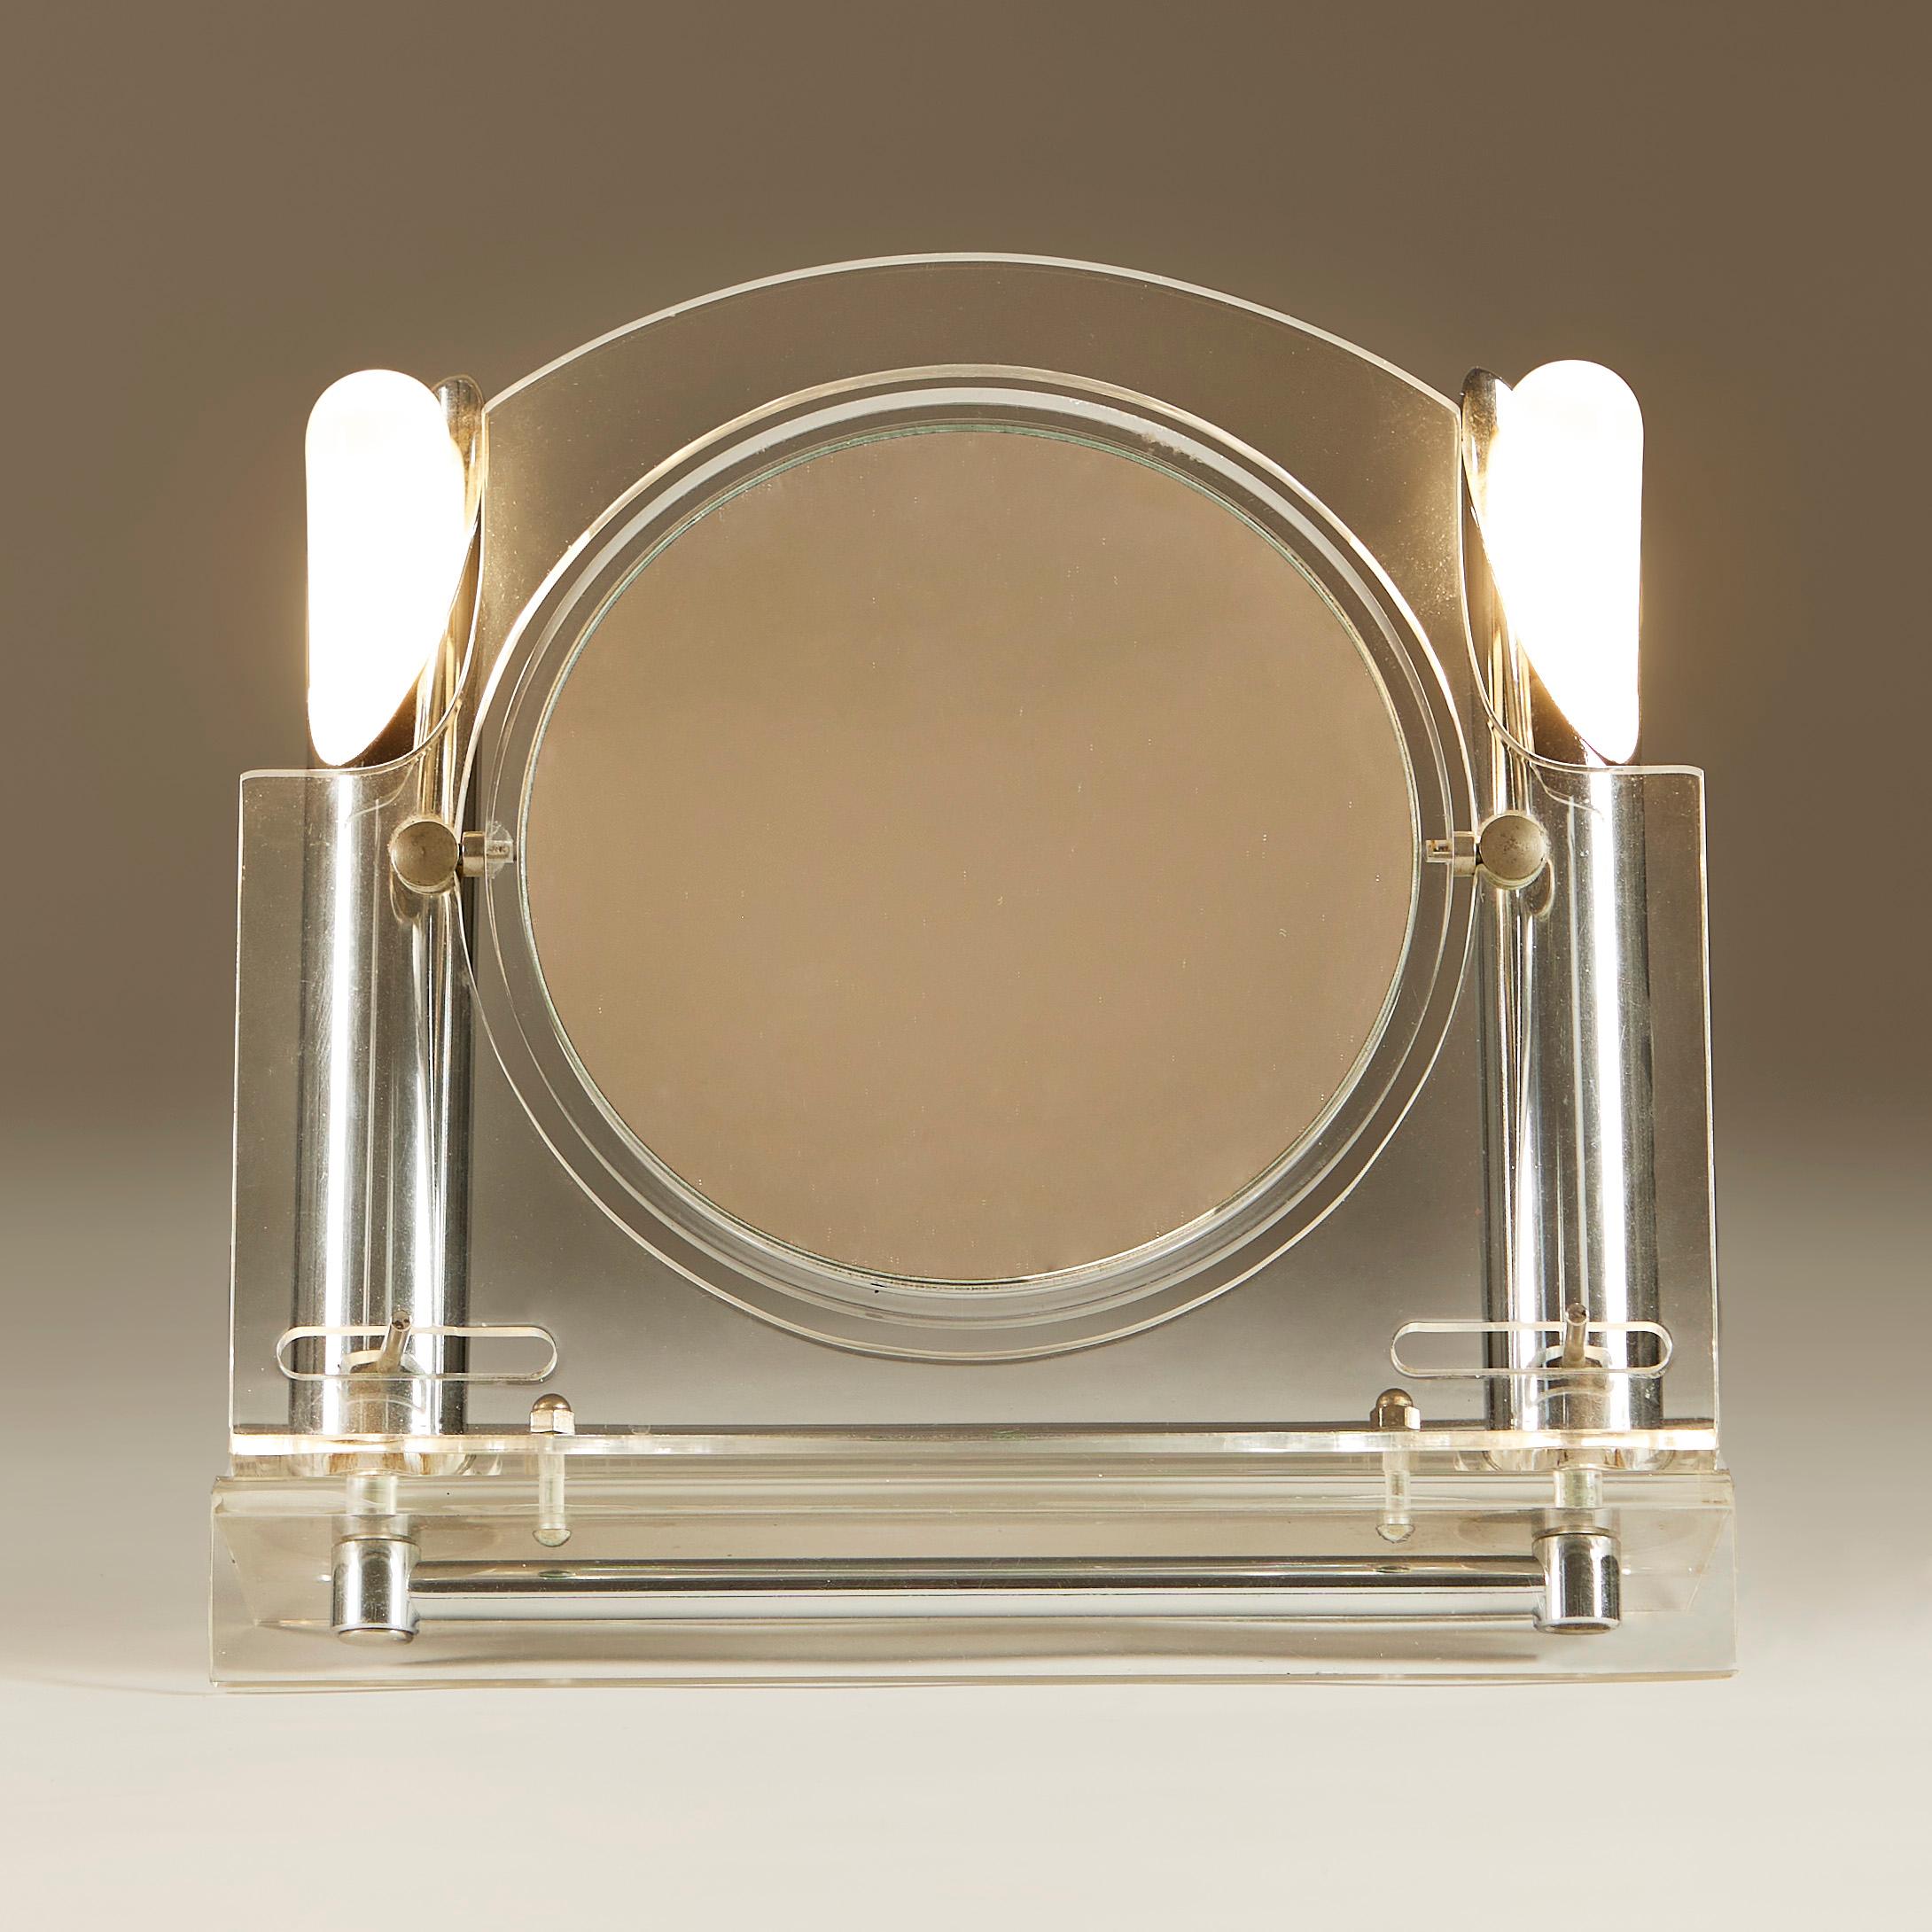 A touch of glamour. double sided adjustable mirror with lucite frame and base. Decorative adjustable chrome tubes support lightbulbs either side.